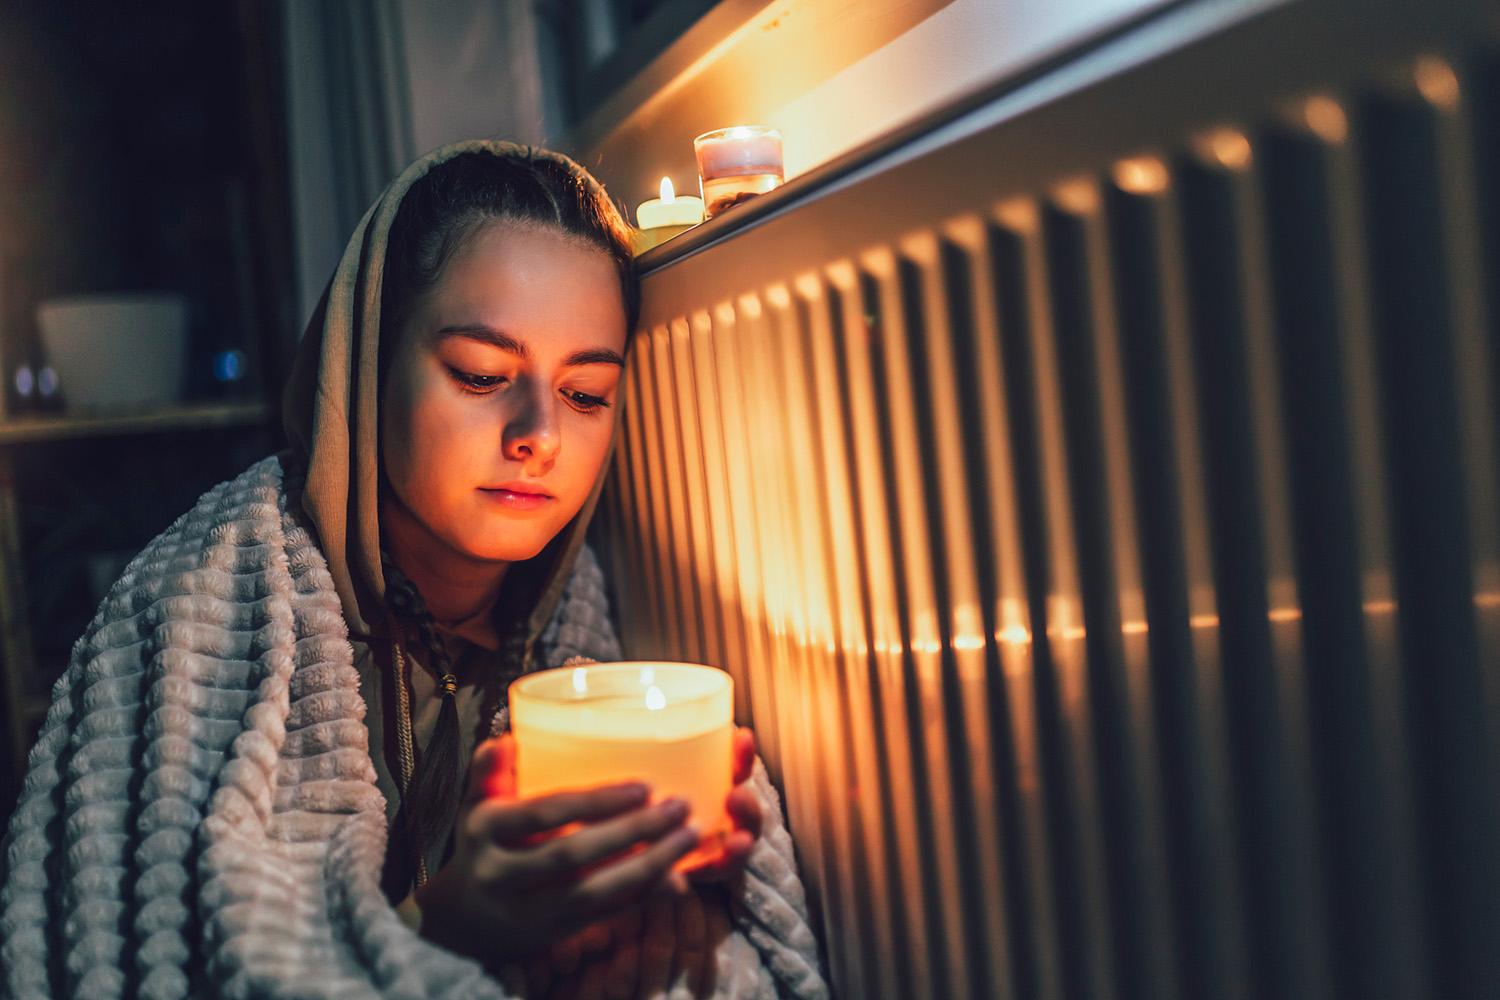 A young girl wrapped in a blanket holds a candle during a power outage.